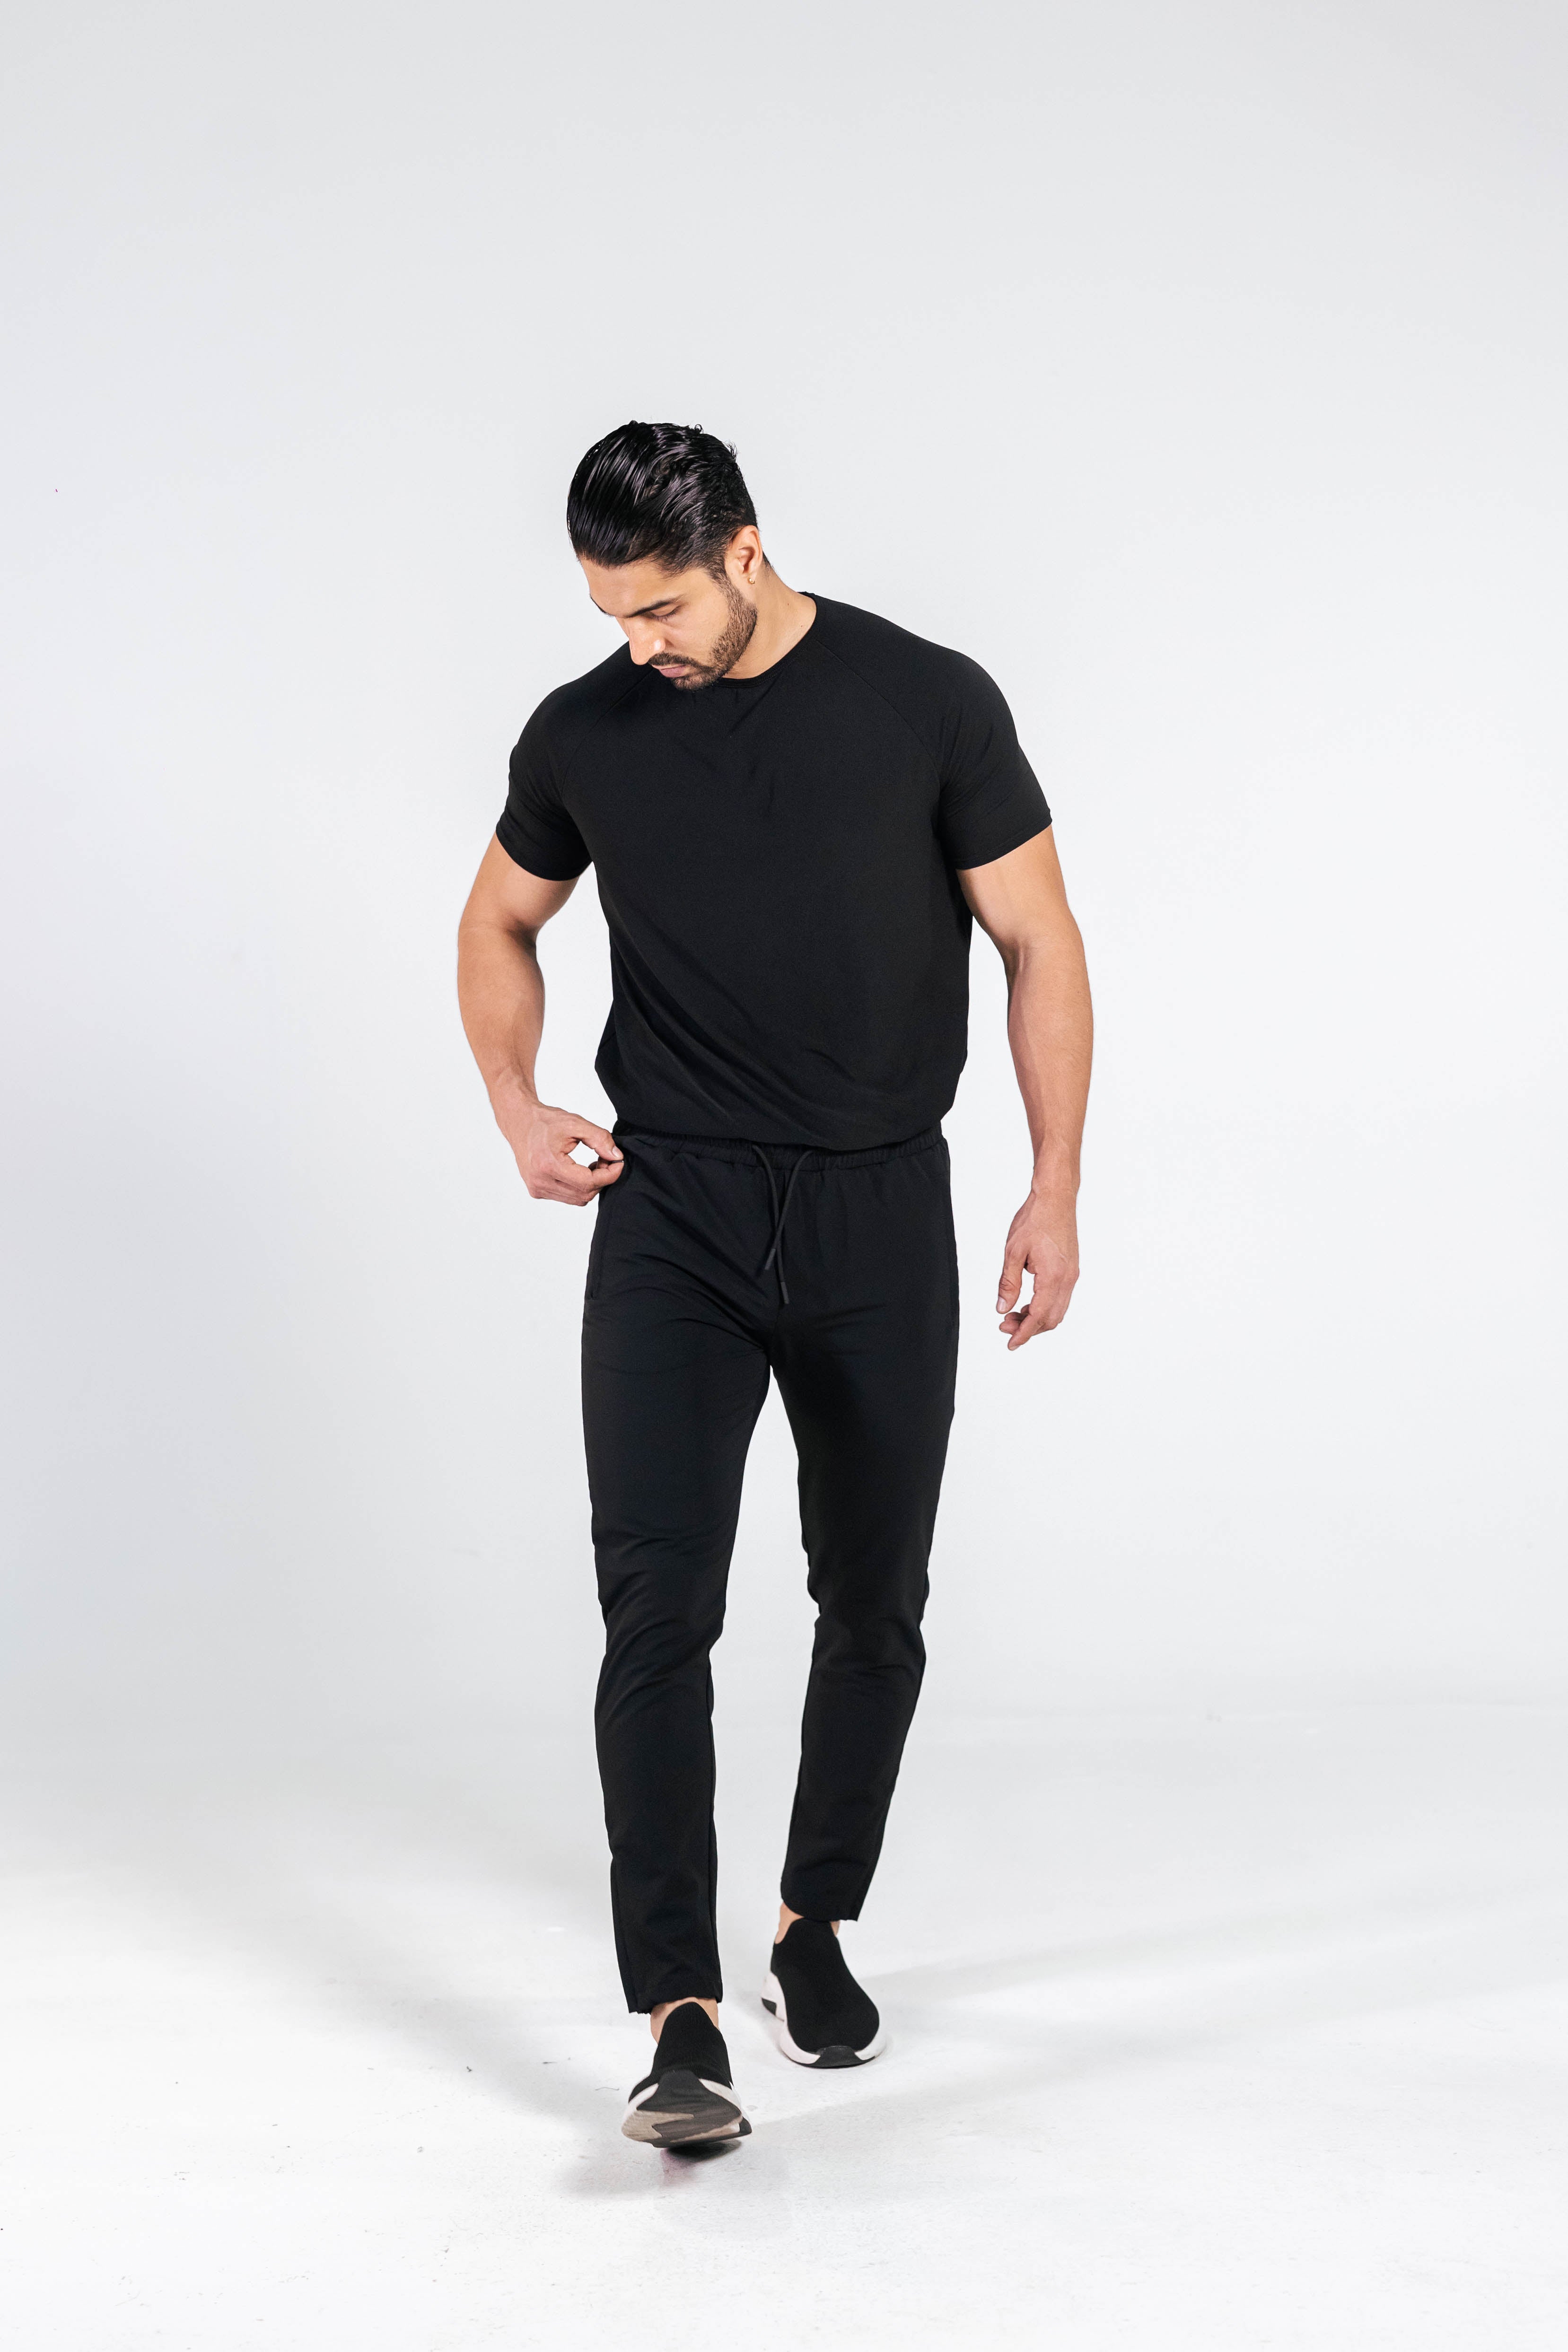 What is the best way to match a shirt with joggers? - Quora